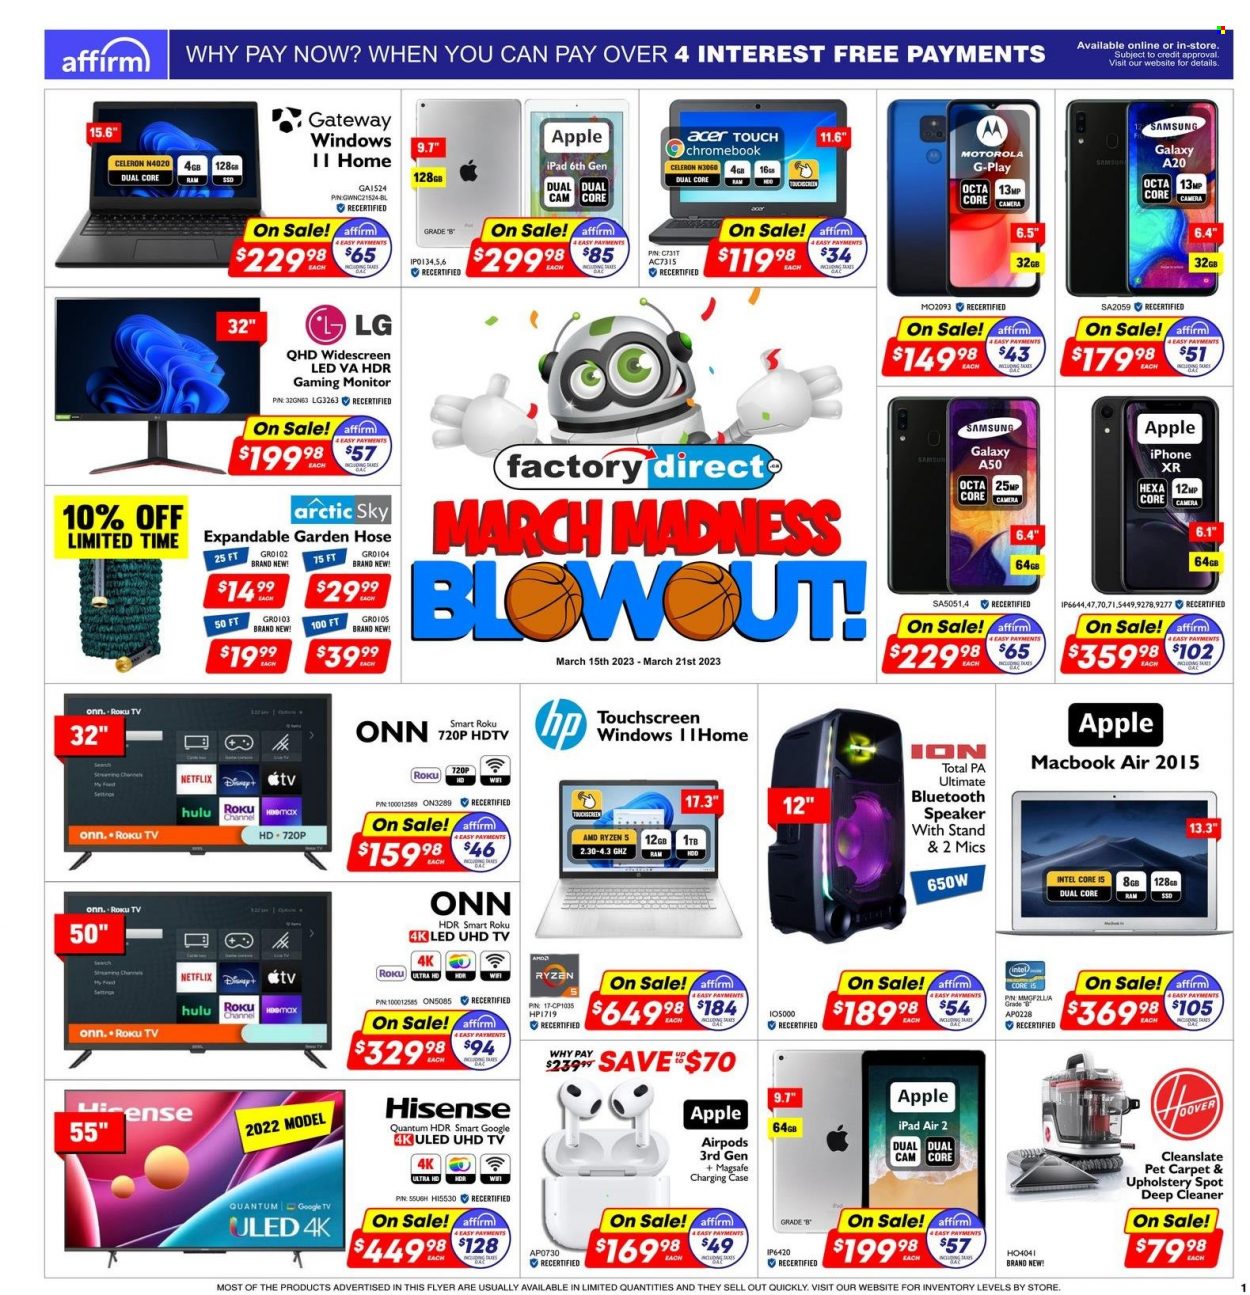 thumbnail - Factory Direct Flyer - March 15, 2023 - March 21, 2023 - Sales products - Intel, Apple, Hewlett Packard, iPad, Samsung Galaxy, cake, cleaner, pin, gateway, Samsung, iPhone, Hisense, Samsung Galaxy A, Samsung Galaxy A20, Samsung Galaxy A50, chromebook, MacBook, MacBook Air, Ryzen, monitor, roku tv, UHD TV, ultra hd, HDTV, TV, speaker, bluetooth speaker, Airpods, garden hose, Acer, camera, Motorola, iPhone XR. Page 1.